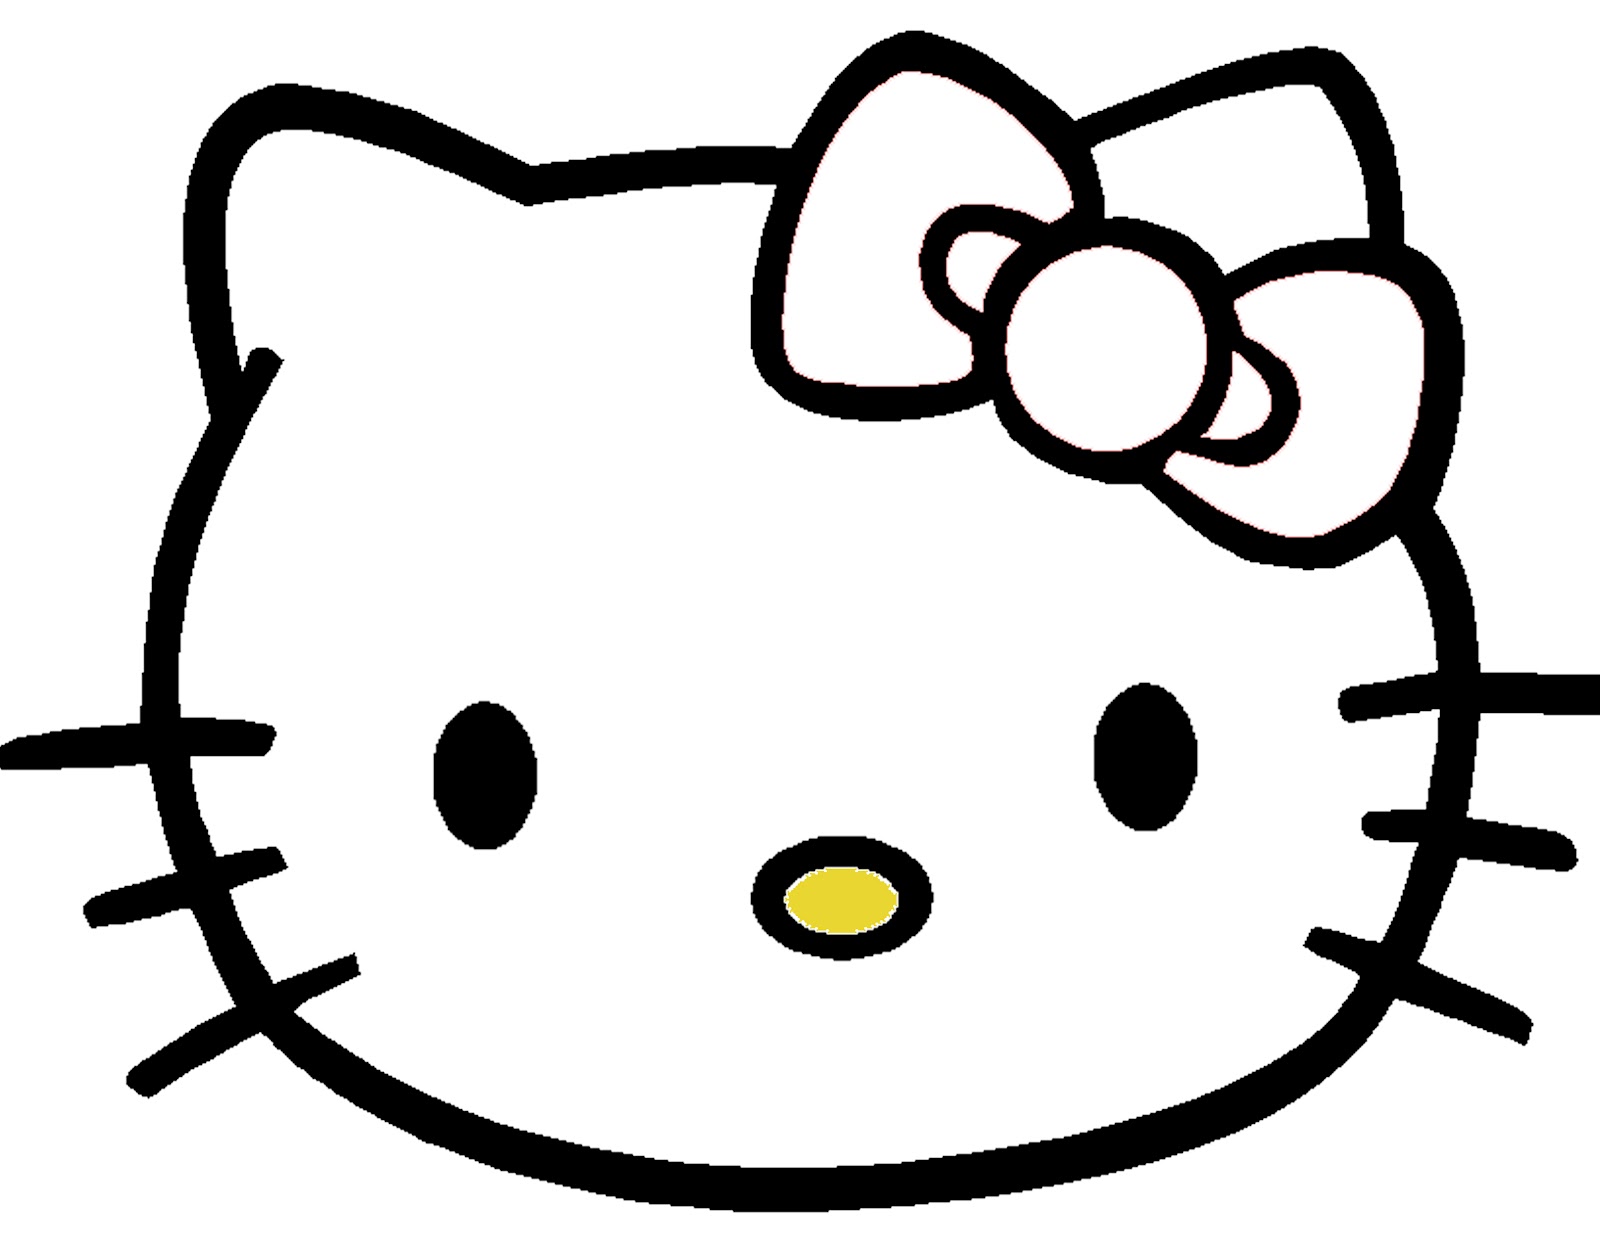 Template Of Hello Kitty